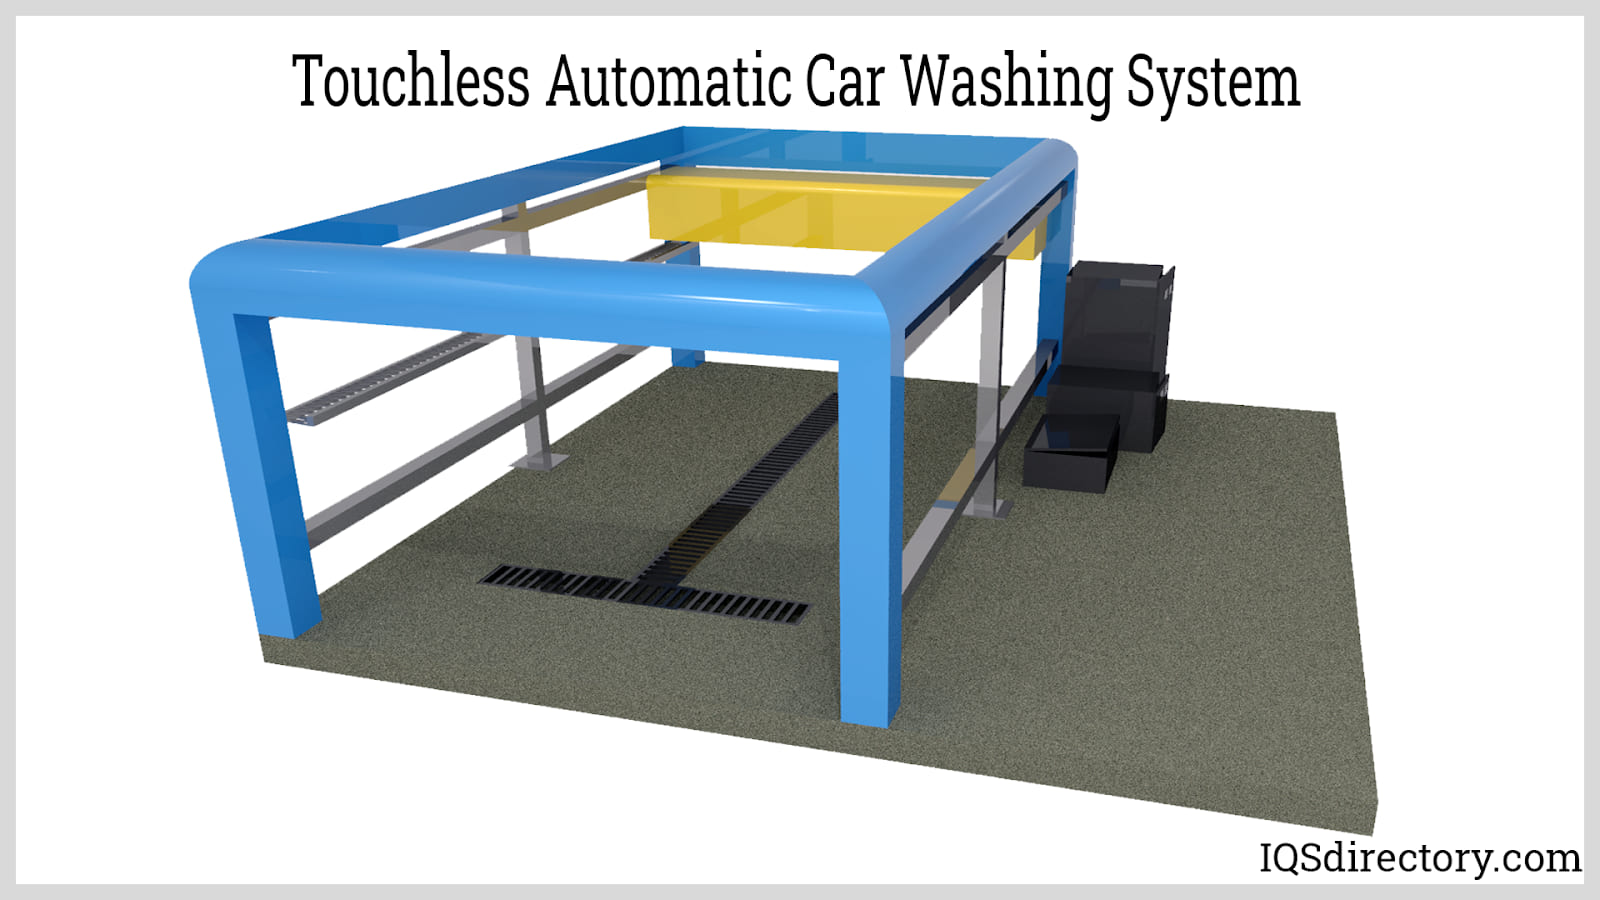 Touchless Automatic Car Washing System